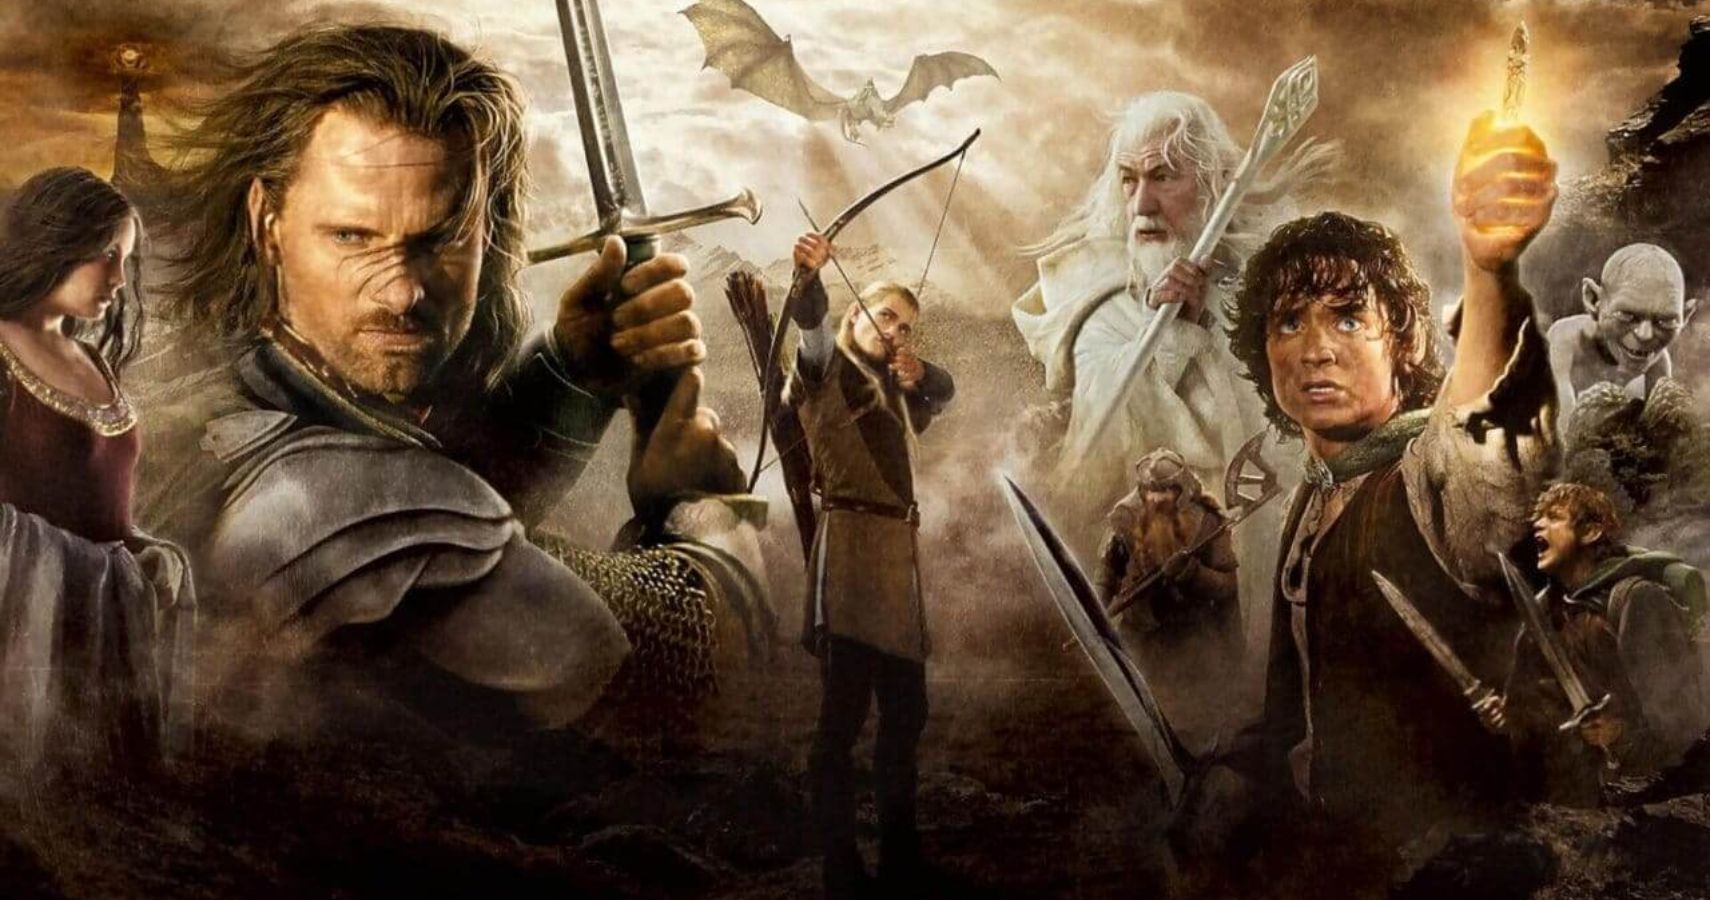 Amazons The Lord of the Rings MMO To Release In 2022 According To Release Reports